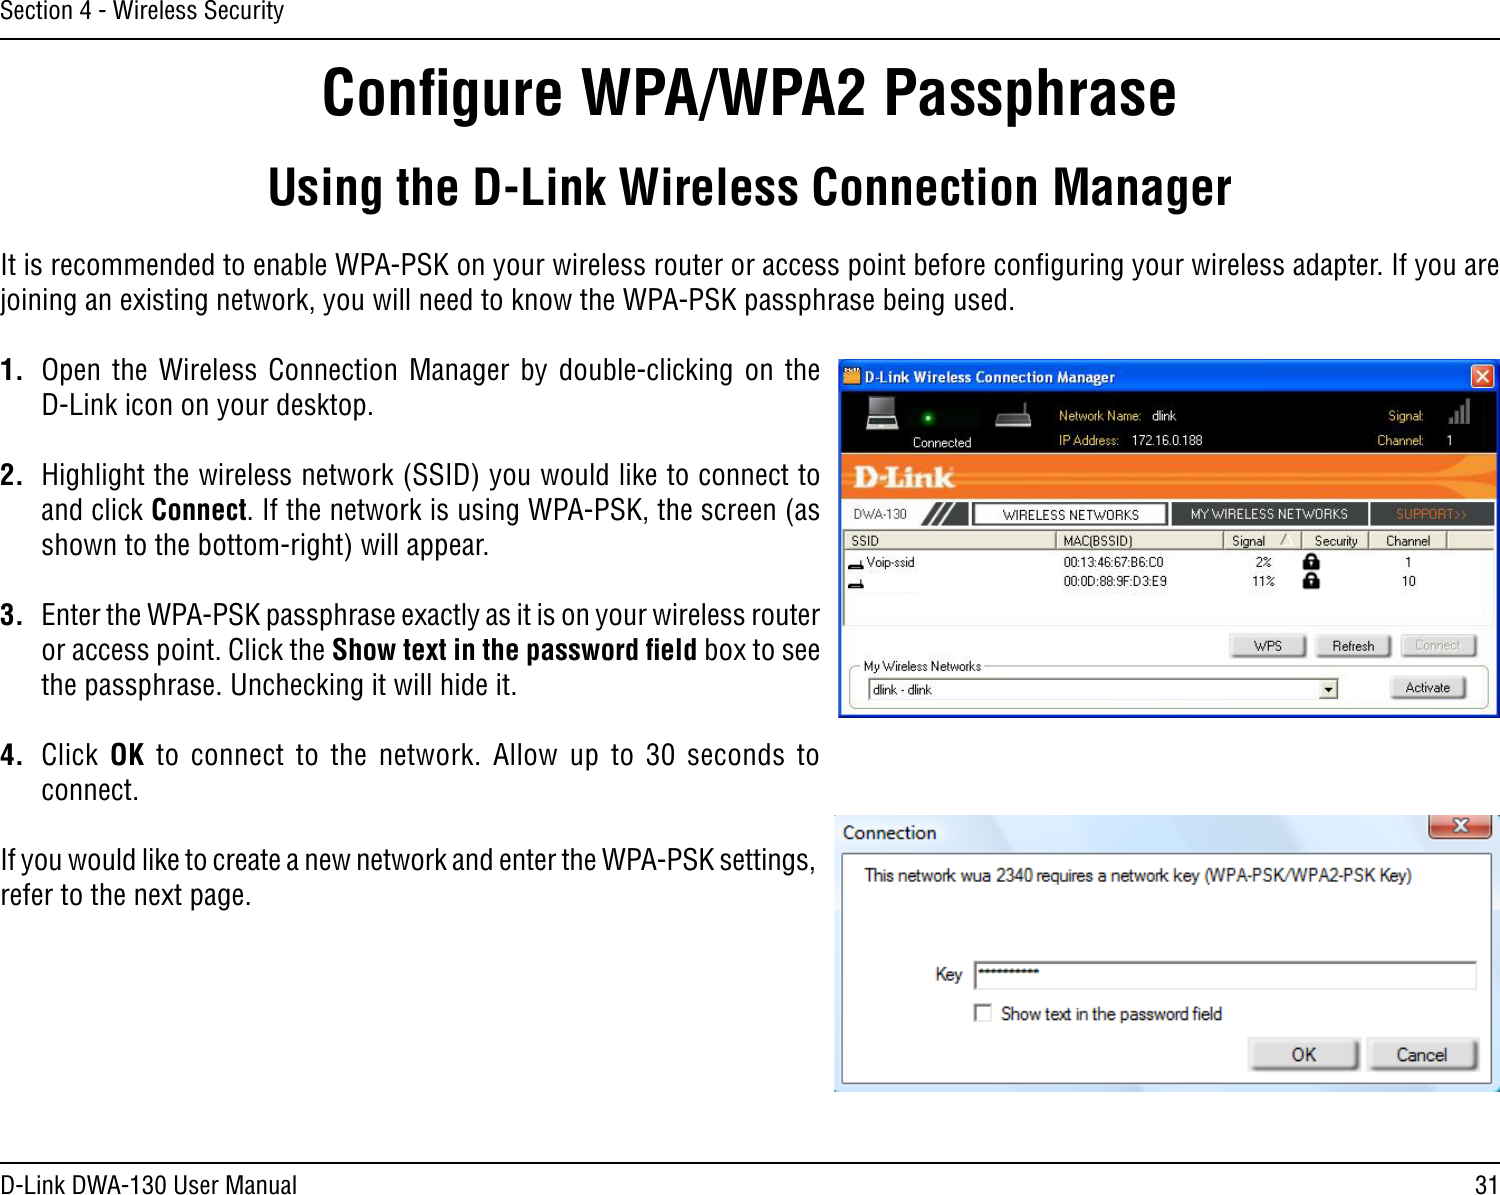 31D-Link DWA-130 User ManualSection 4 - Wireless SecurityConﬁgure WPA/WPA2 PassphraseUsing the D-Link Wireless Connection ManagerIt is recommended to enable WPA-PSK on your wireless router or access point before conﬁguring your wireless adapter. If you are joining an existing network, you will need to know the WPA-PSK passphrase being used.1.  Open  the  Wireless  Connection  Manager  by  double-clicking  on  the D-Link icon on your desktop. 2.  Highlight the wireless network (SSID) you would like to connect to and click Connect. If the network is using WPA-PSK, the screen (as shown to the bottom-right) will appear. 3.  Enter the WPA-PSK passphrase exactly as it is on your wireless router or access point. Click the Show text in the password ﬁeld box to see the passphrase. Unchecking it will hide it.4.  Click OK  to  connect  to  the  network.  Allow  up  to  30  seconds  to connect.If you would like to create a new network and enter the WPA-PSK settings, refer to the next page.